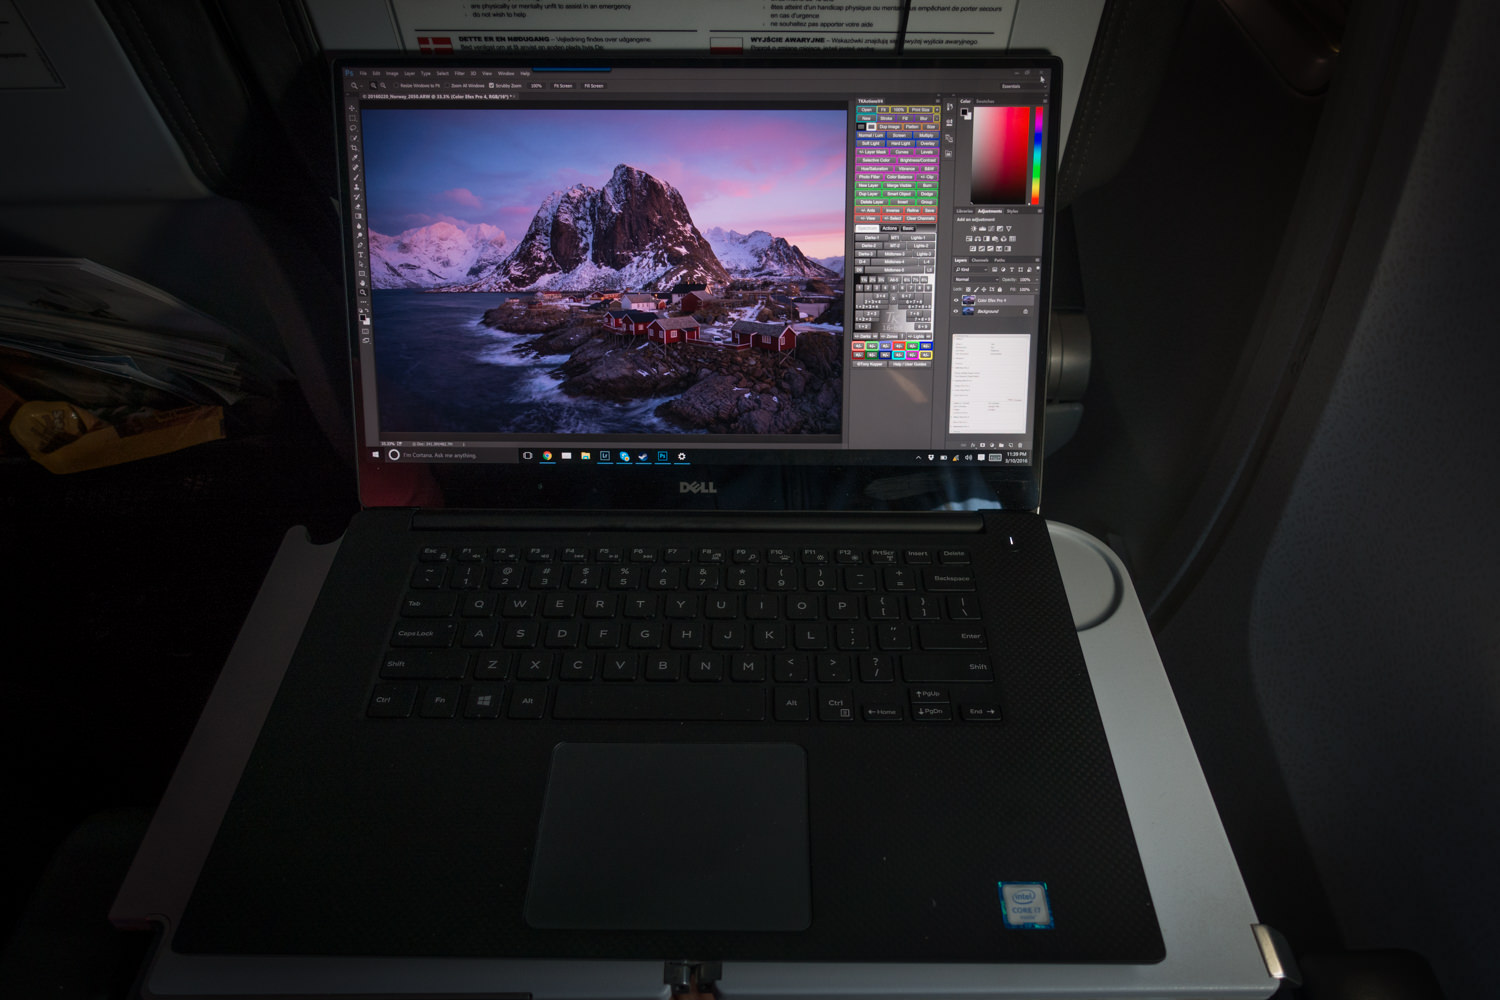 Using the Dell XPS 15 on my flight from Norway to Iceland